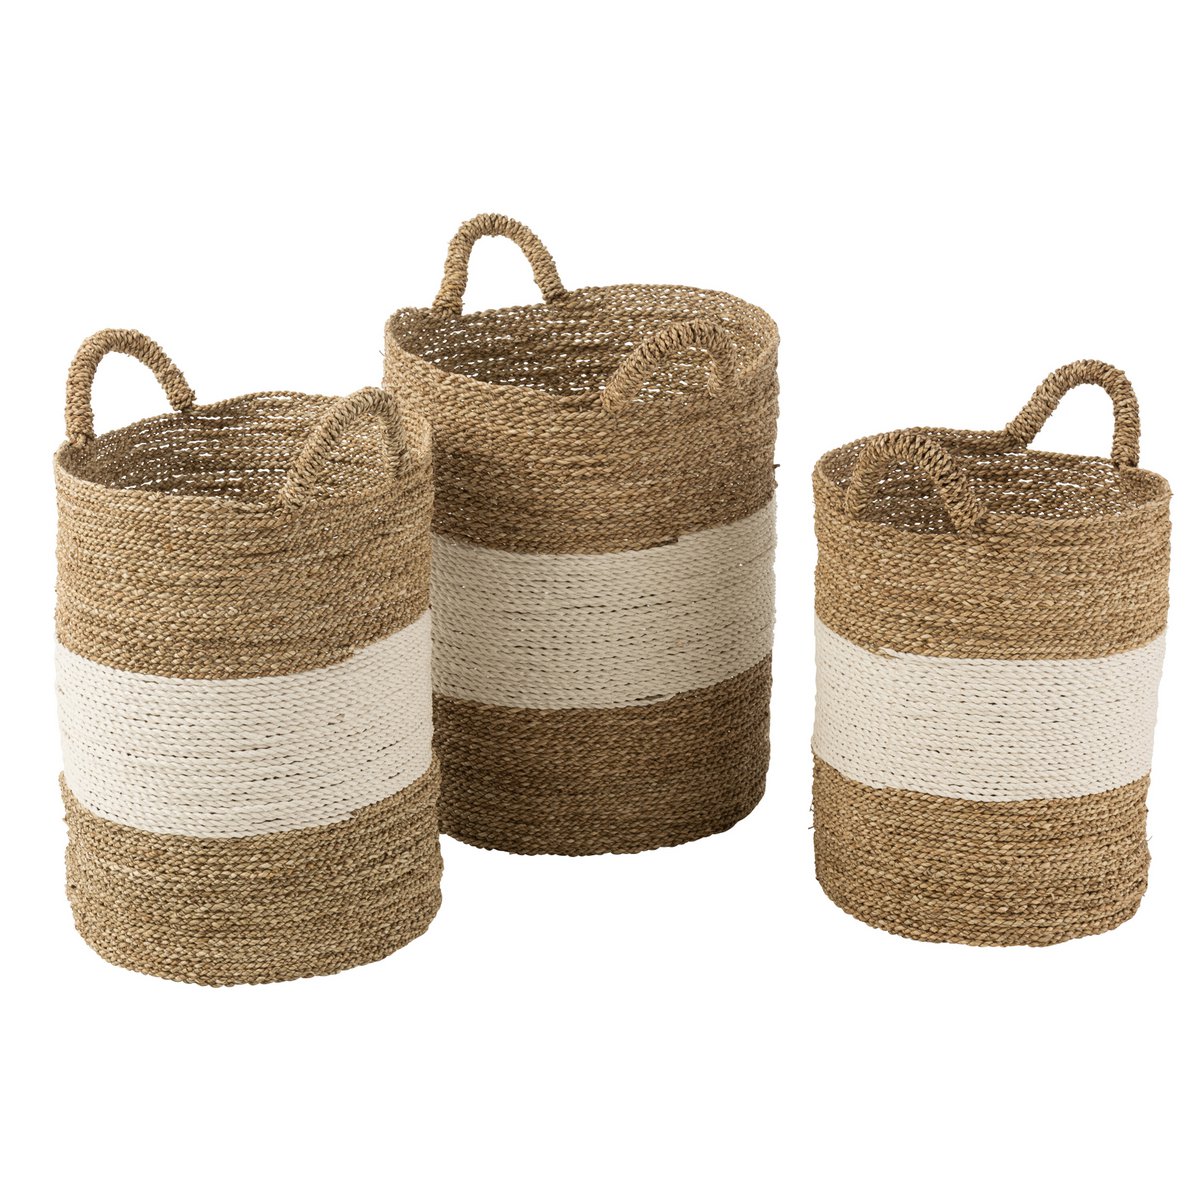 Set of 3 baskets - seagrass, white/natural